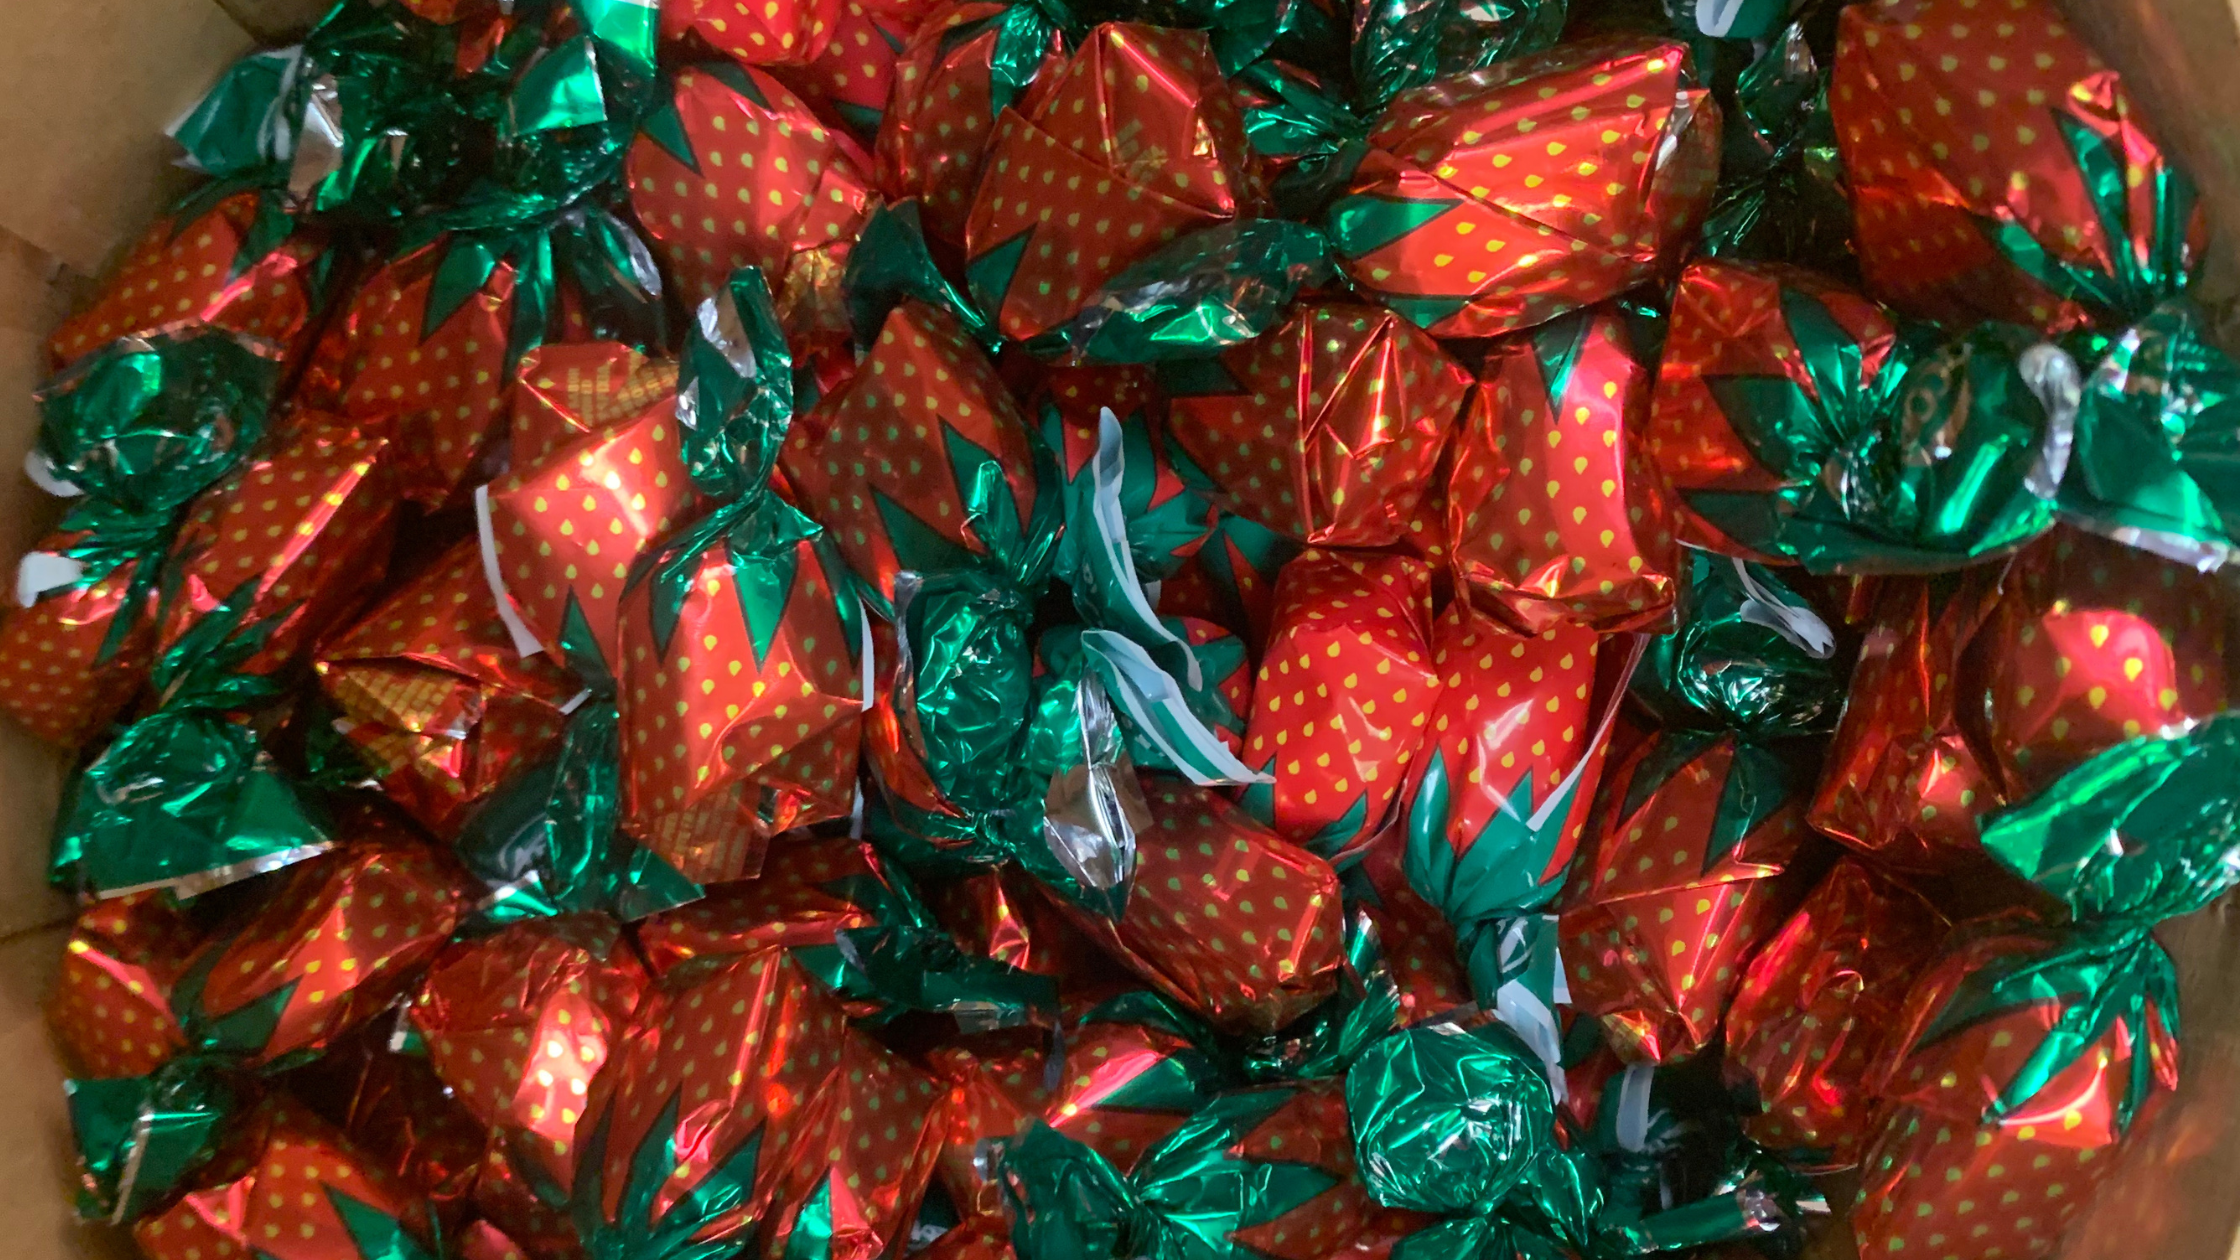 Strawberry Hard Candy - Chocolates & Sweets 